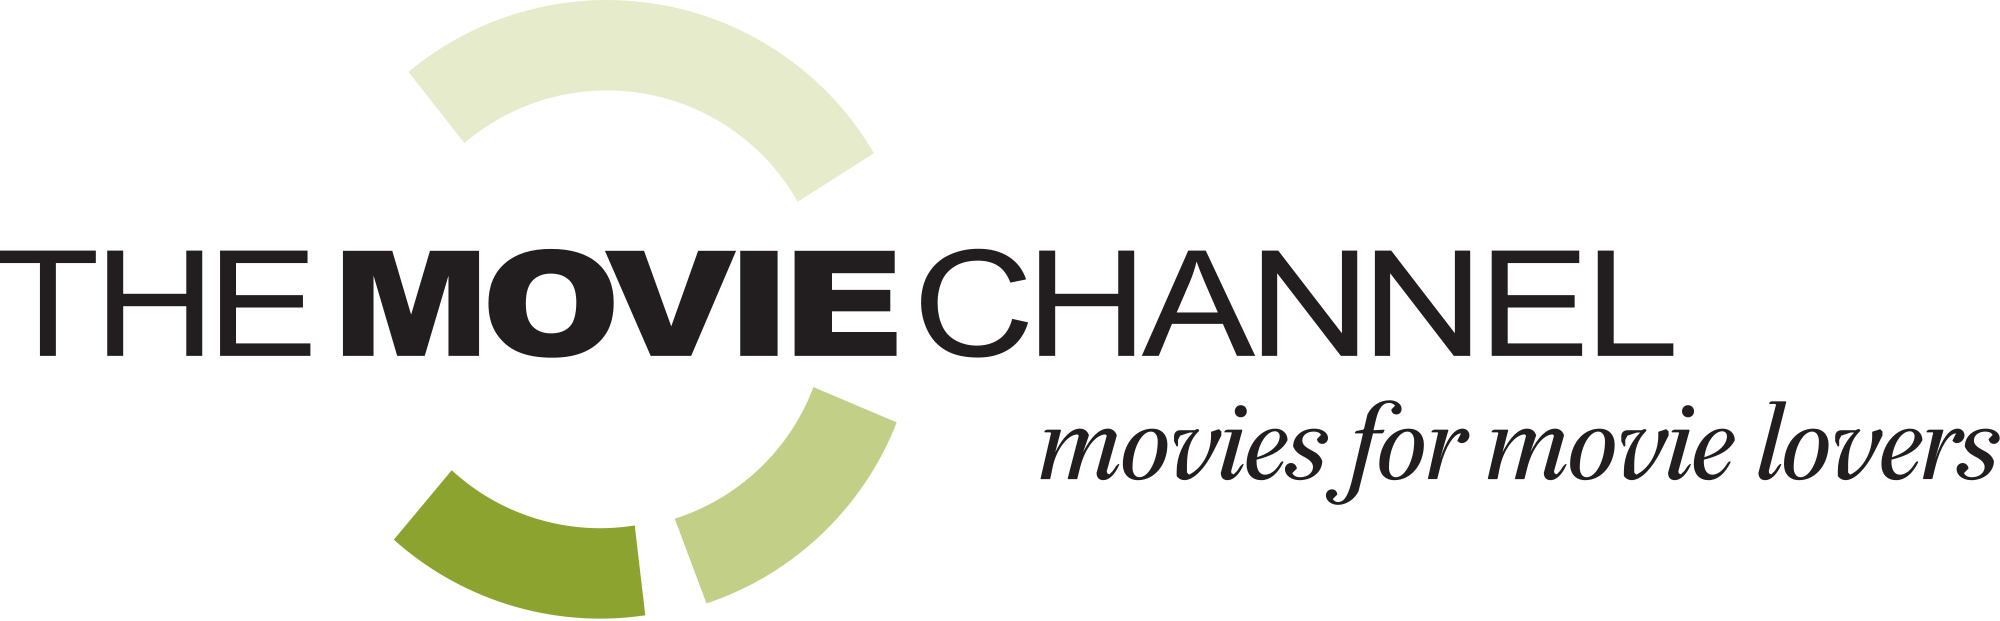 The Movie Channel Logo - File:The Movie Channel.svg - Wikimedia Commons